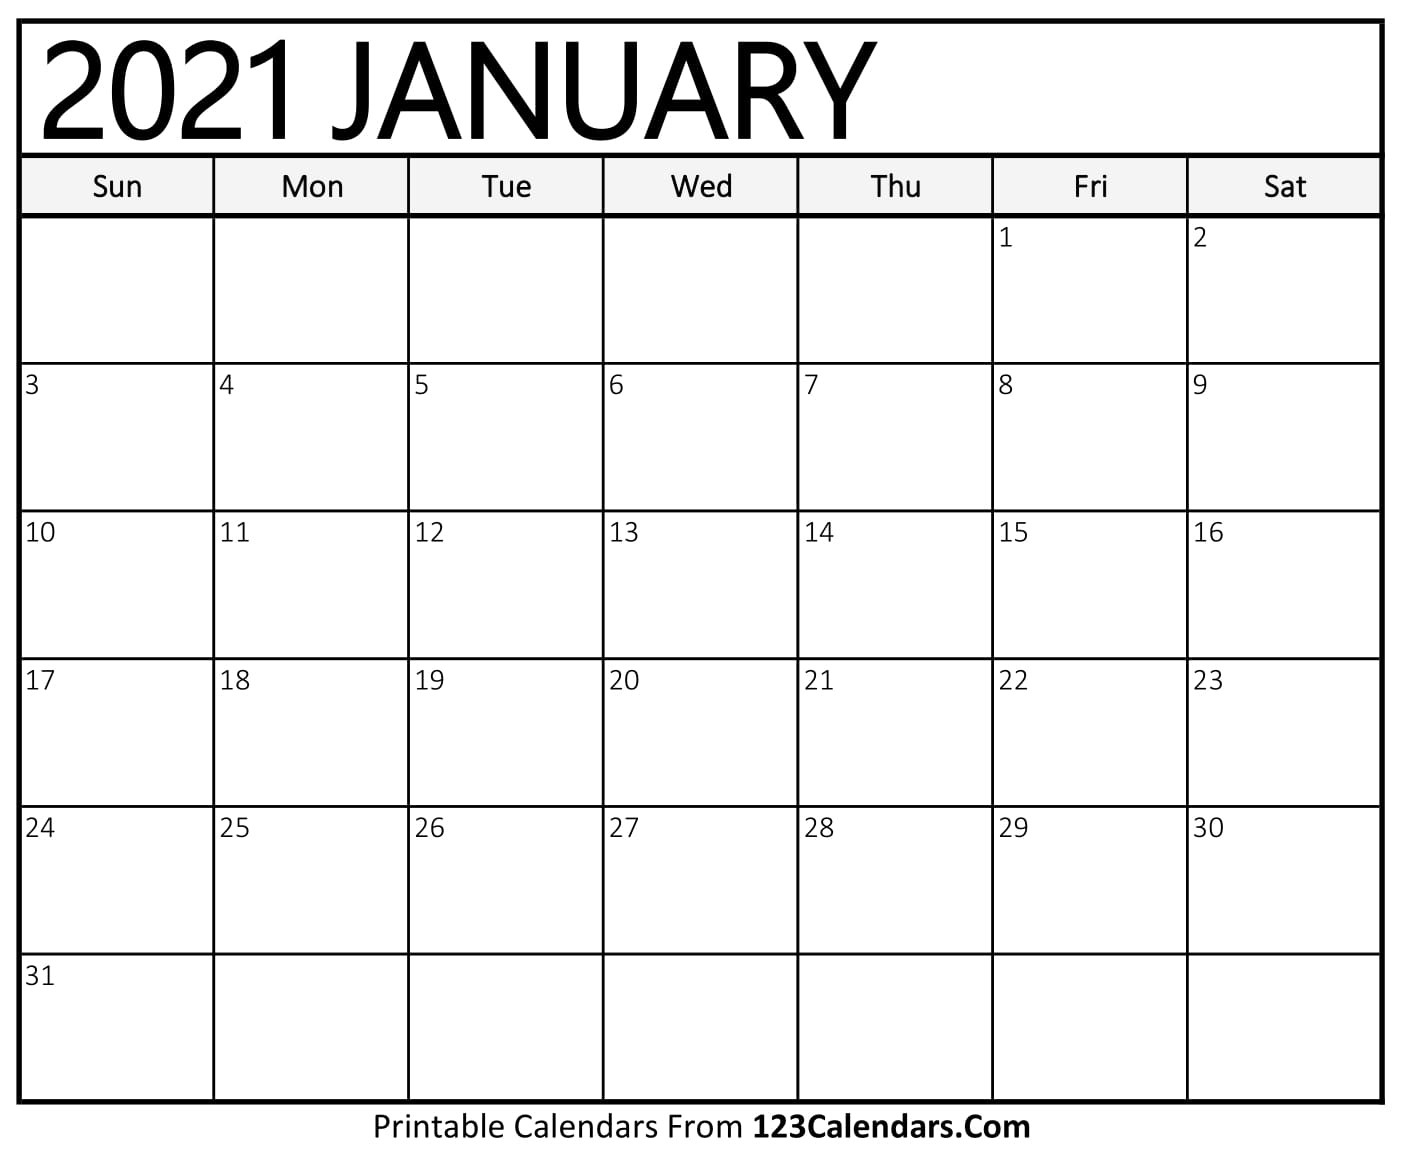 Calendar Of Just Weekends For 2021 | Calendar Printables-2021 Yearly Calendar Printable Free With Notes